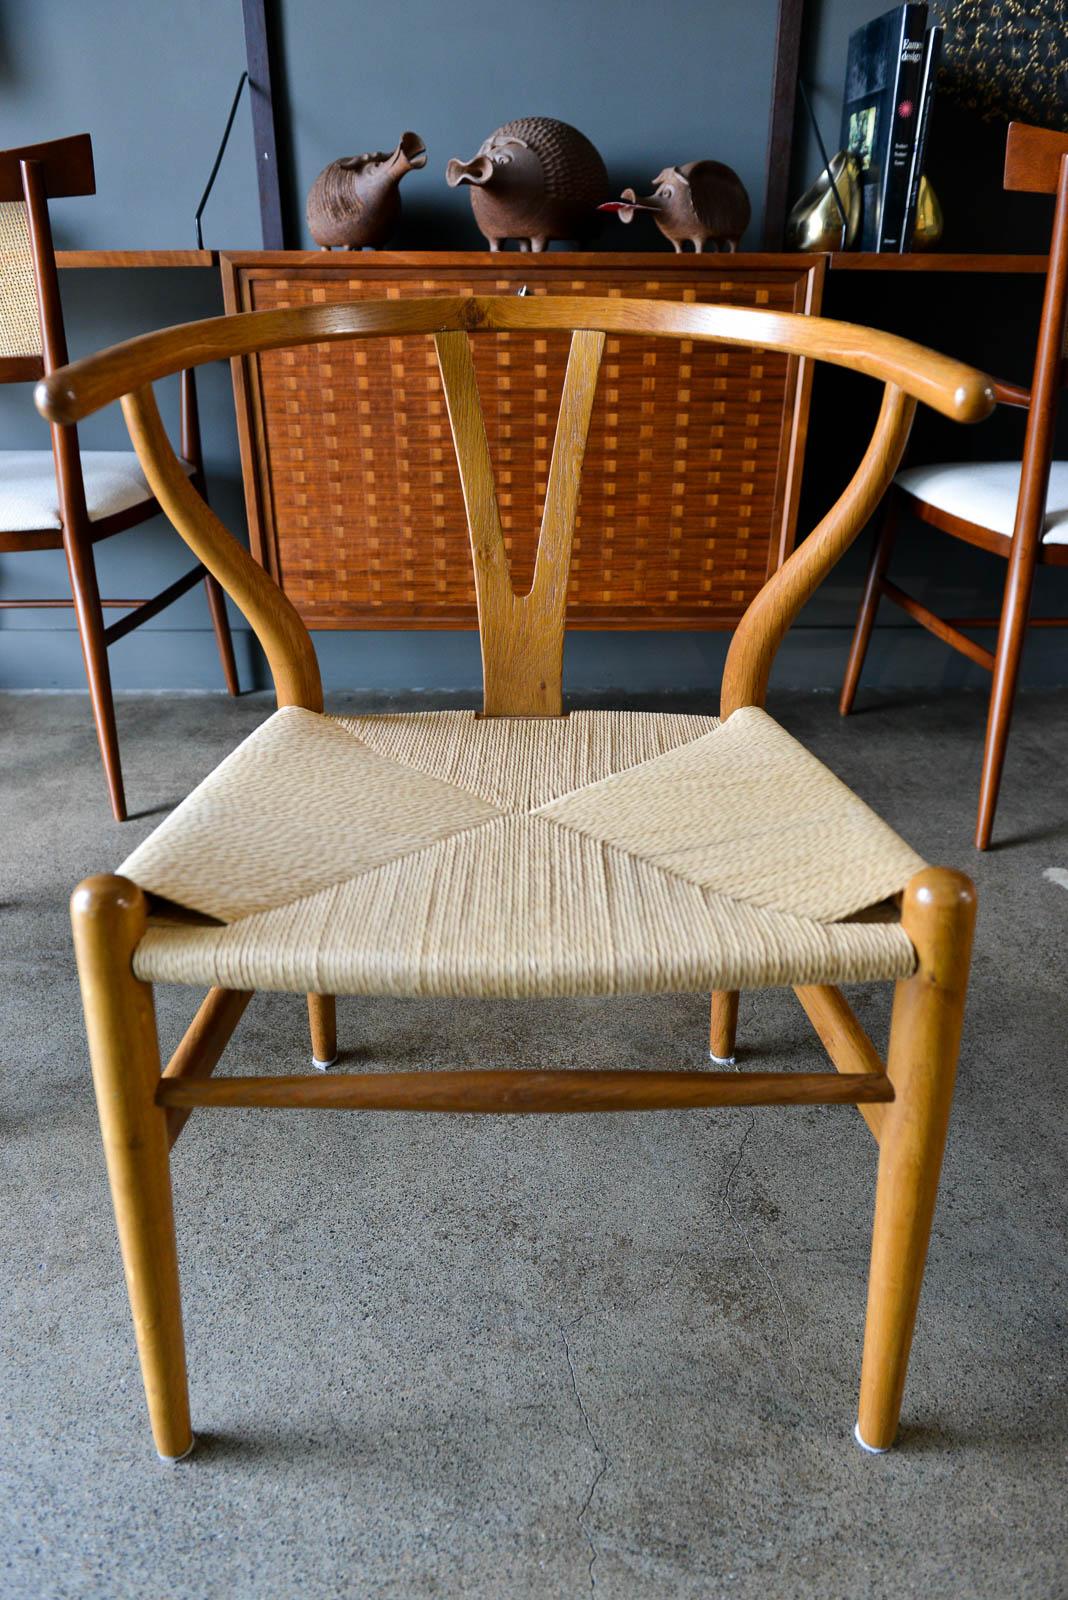 Set of 10 early original Hans Wegner CH24 Wishbone chairs, circa 1955. Matching set of 10 Hans Wegner's classic iconic CH24 wishbone chair. This set is very early, not modern re-issues, and from a one owner estate. All 10 match perfectly and have